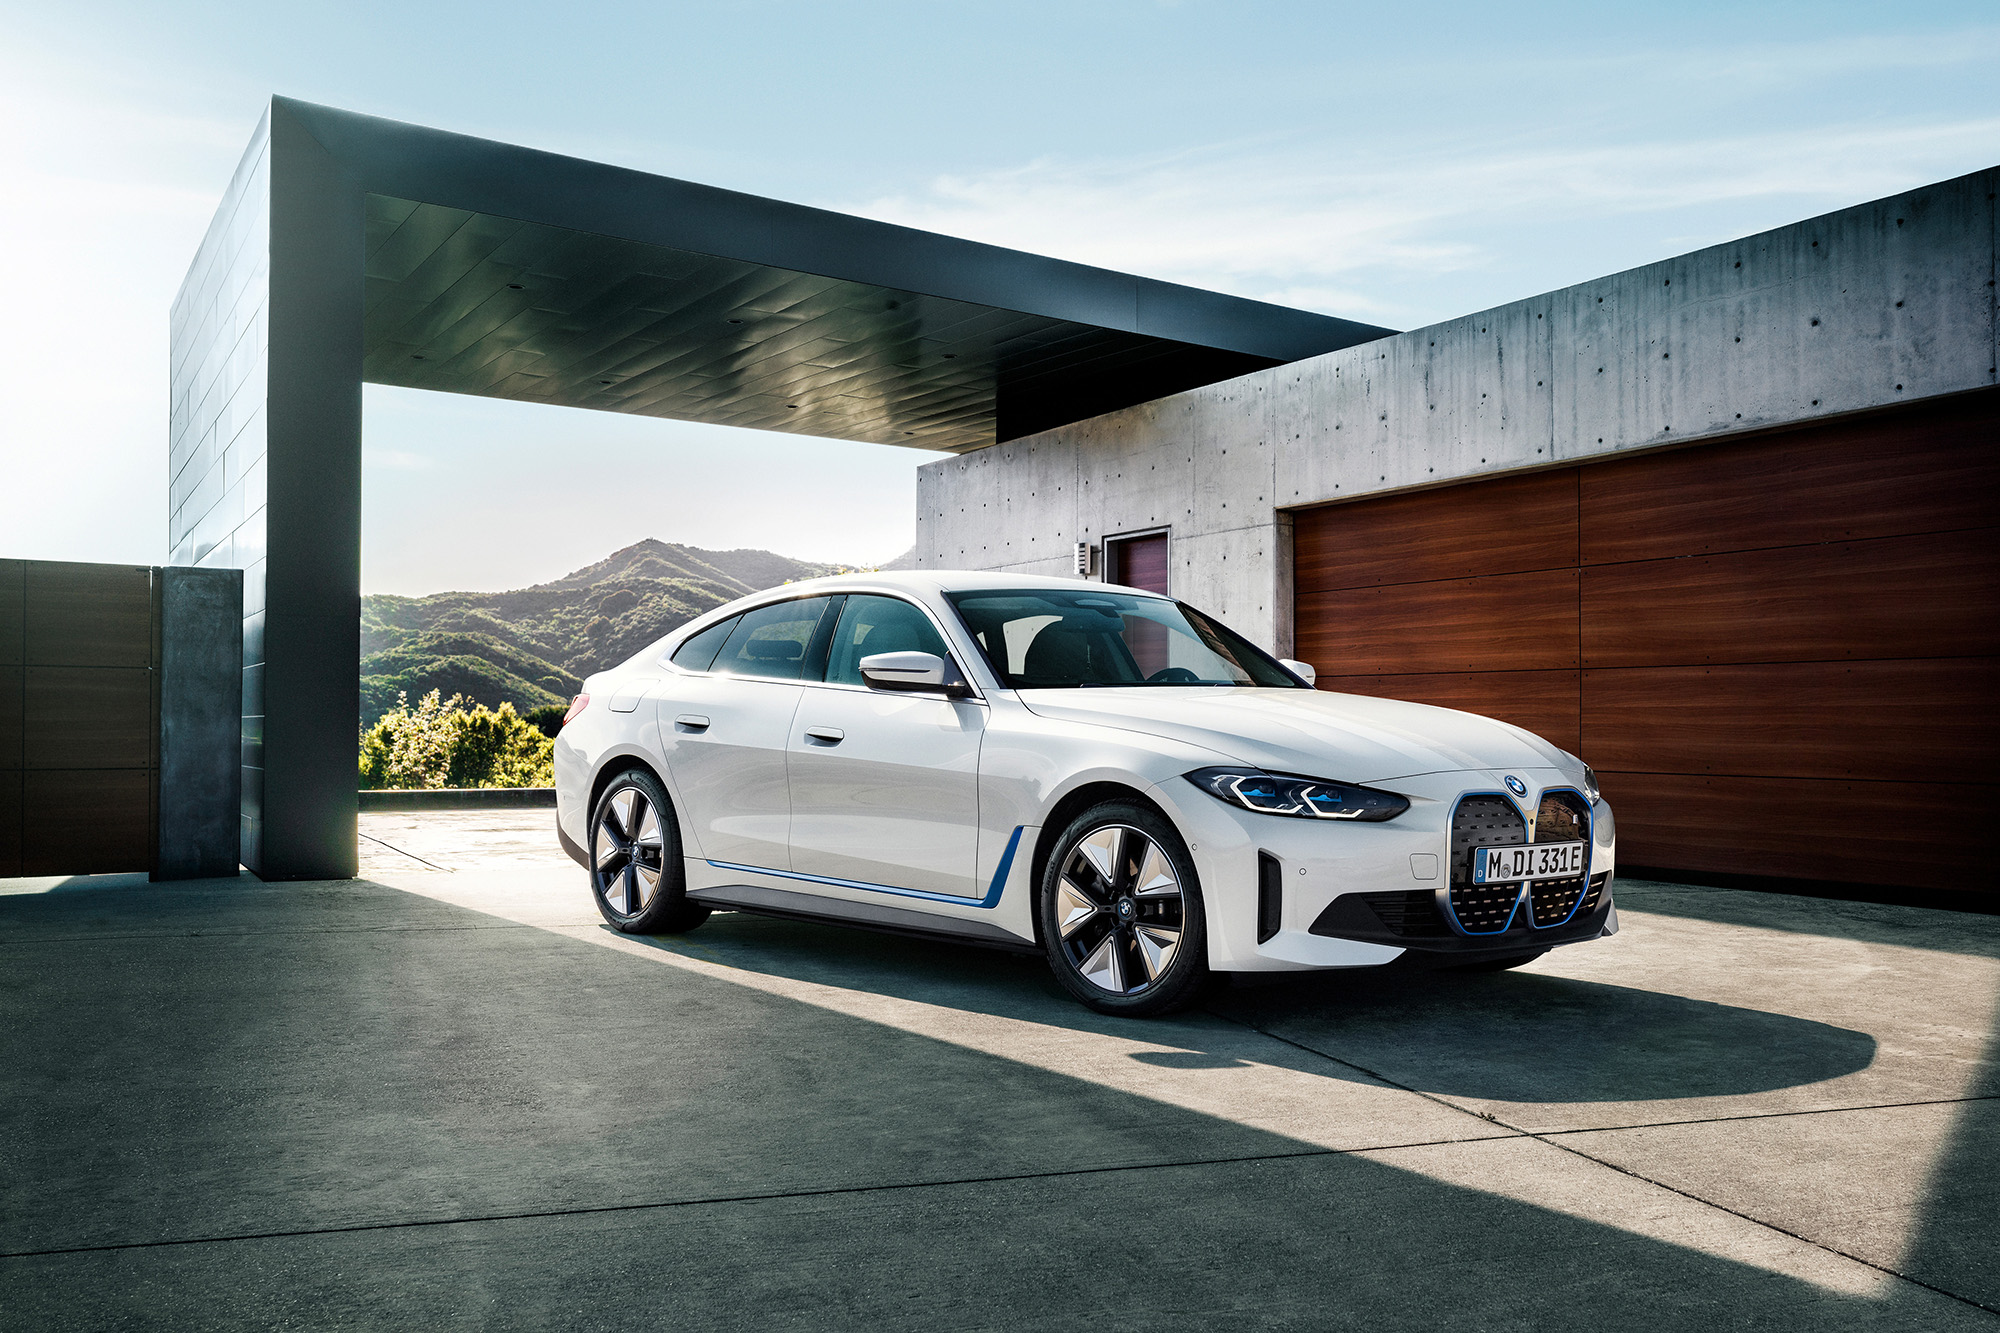 2022 i4 is The First AllElectric Performance Model of BMW